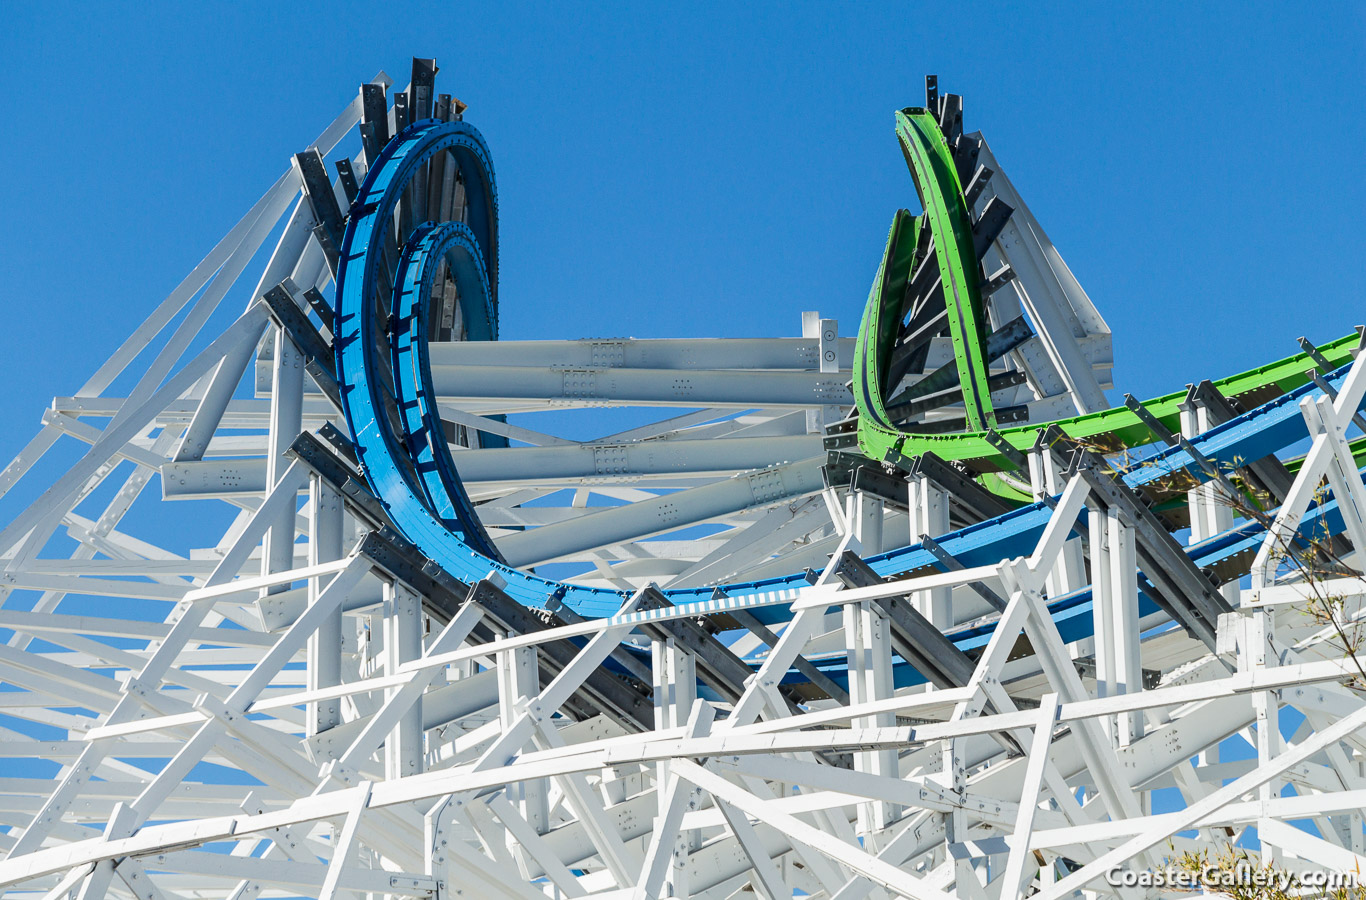 High-five maneuver on the Twisted Colossus coaster